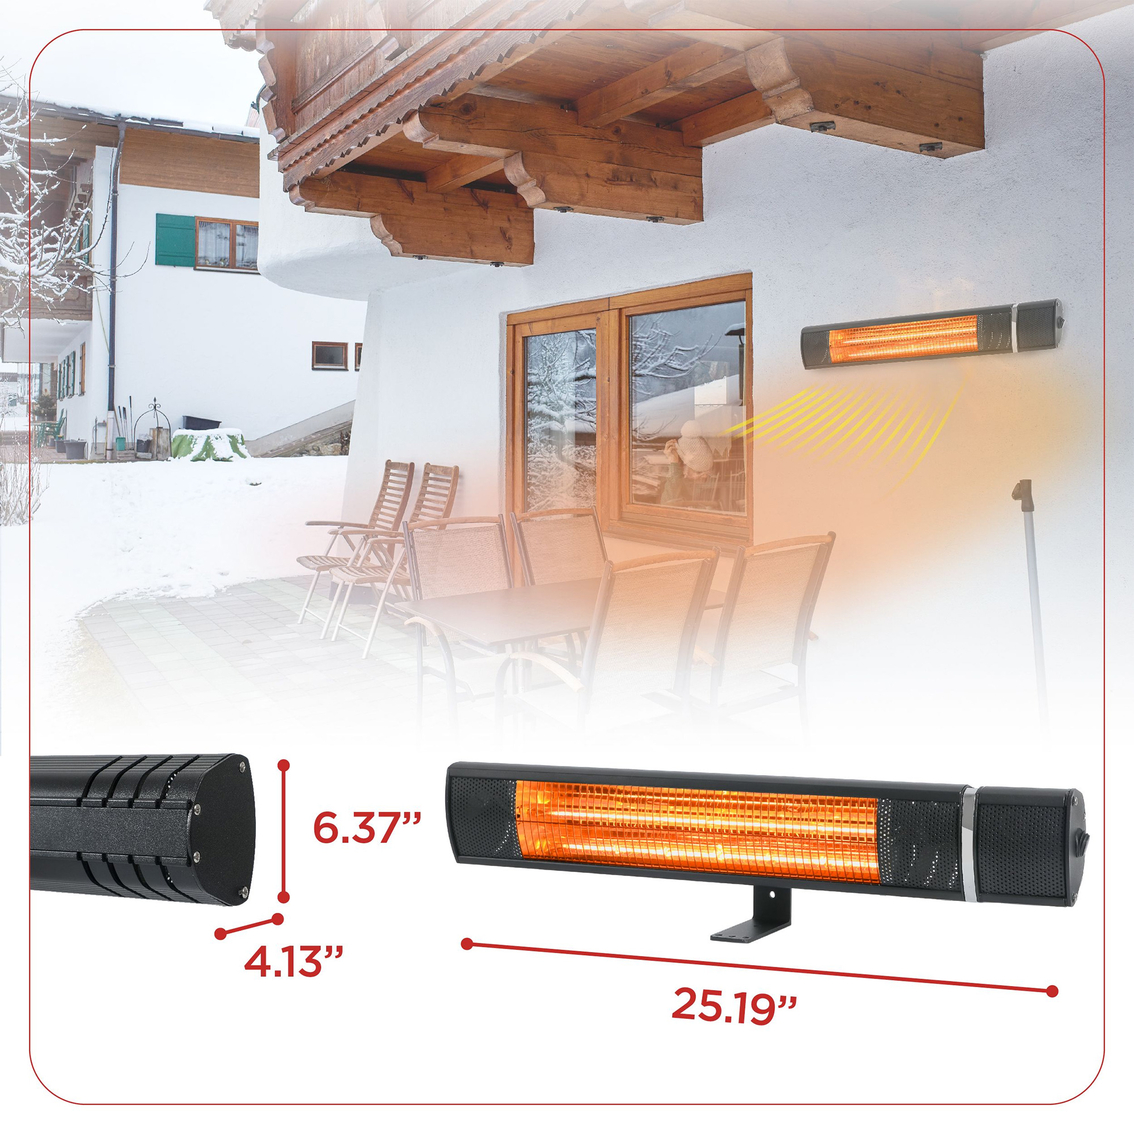 Black + Decker Wall Mounted Electric Patio Heater with Remote Control Functions - Image 7 of 7